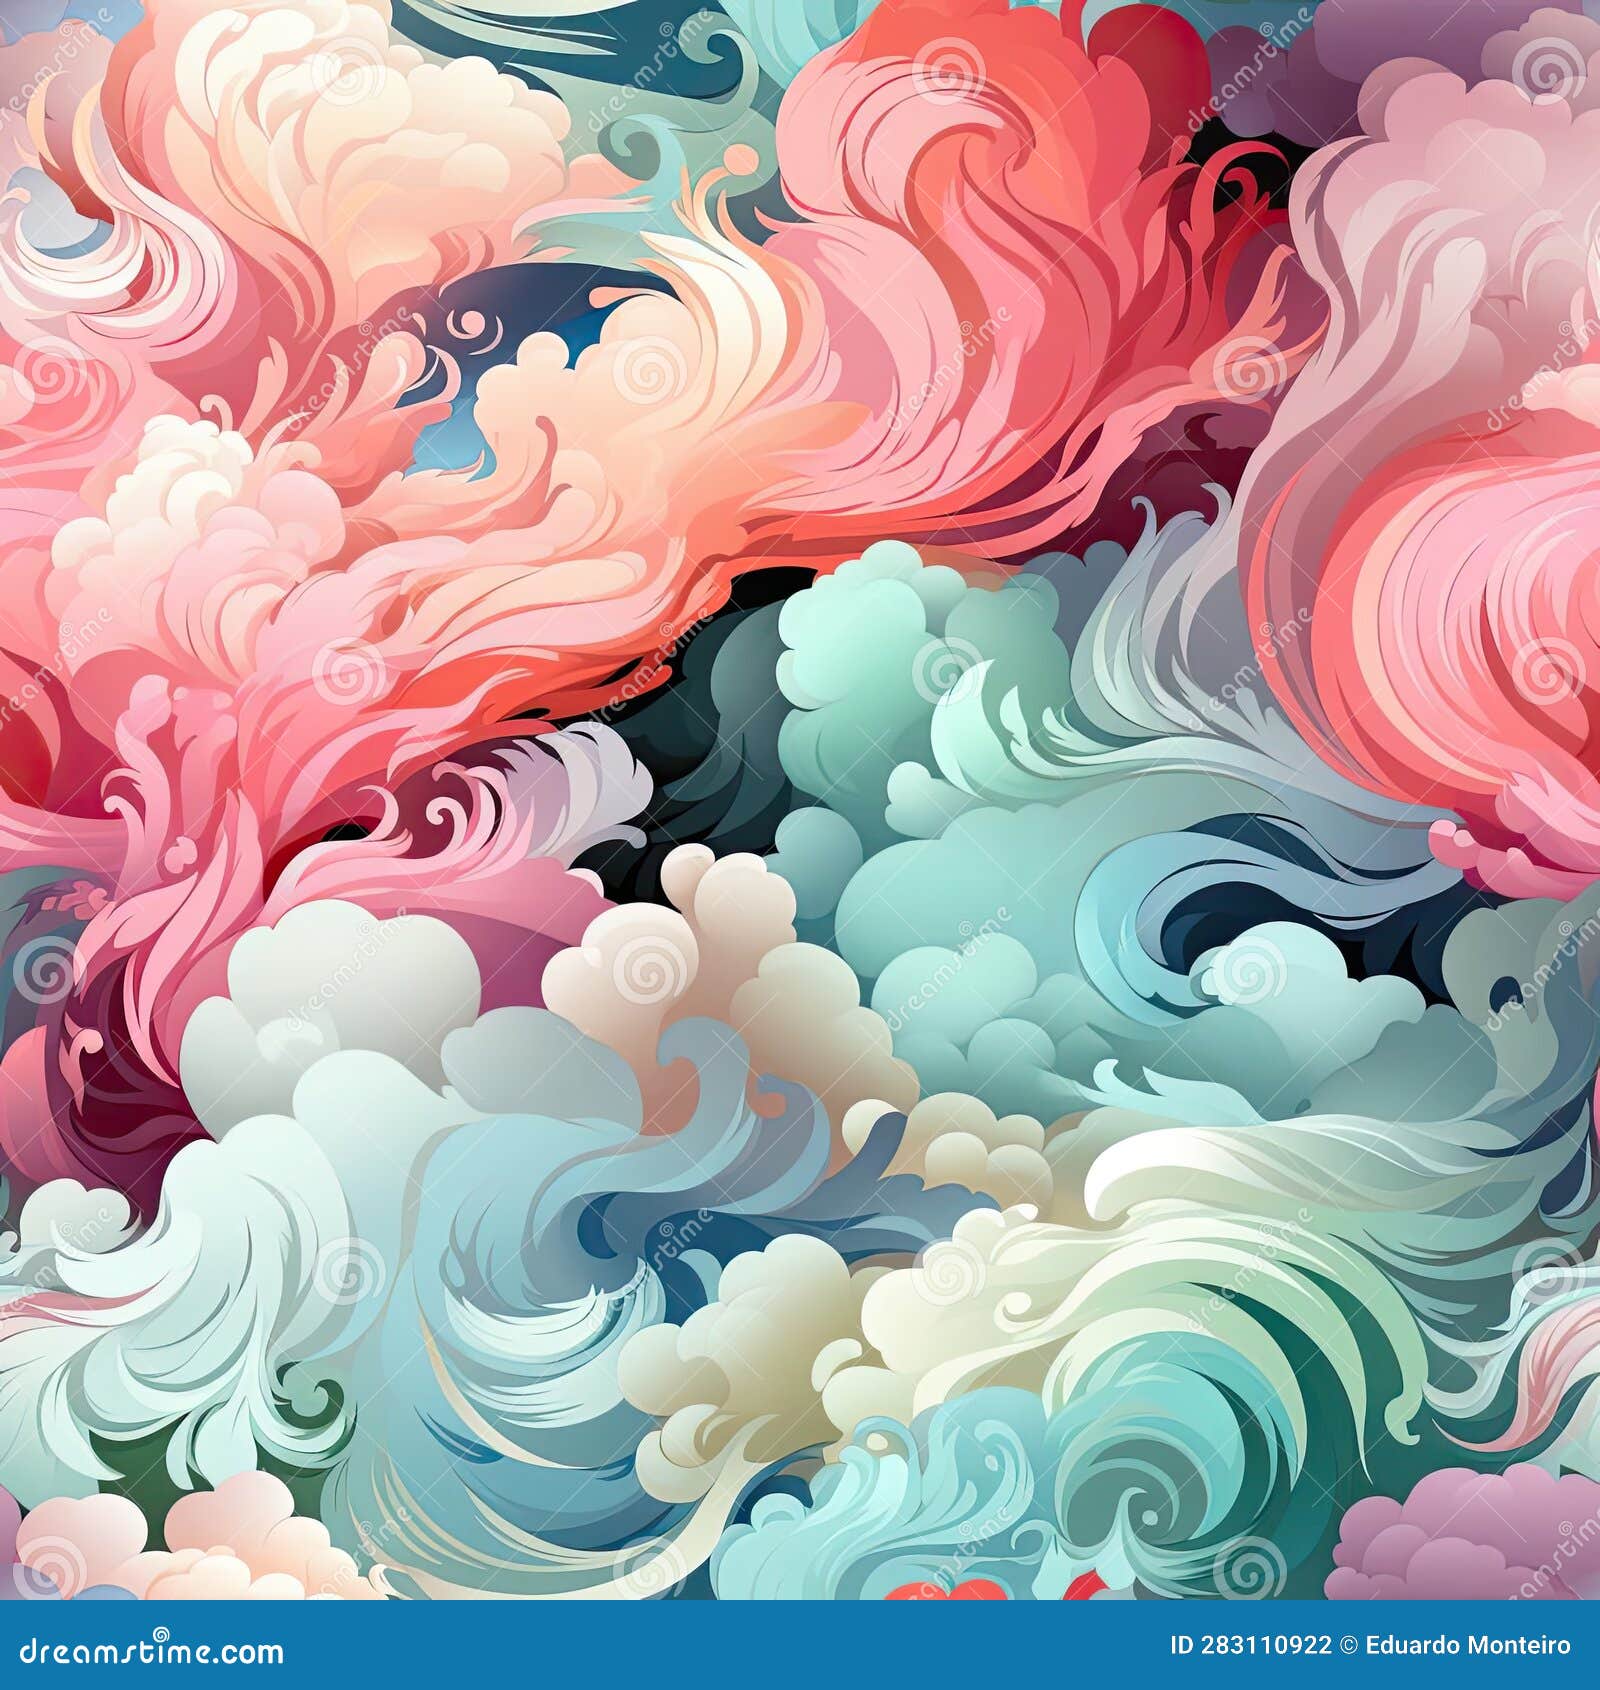 abstract clouds with soft colors in a rococo-inspired style (tiled)